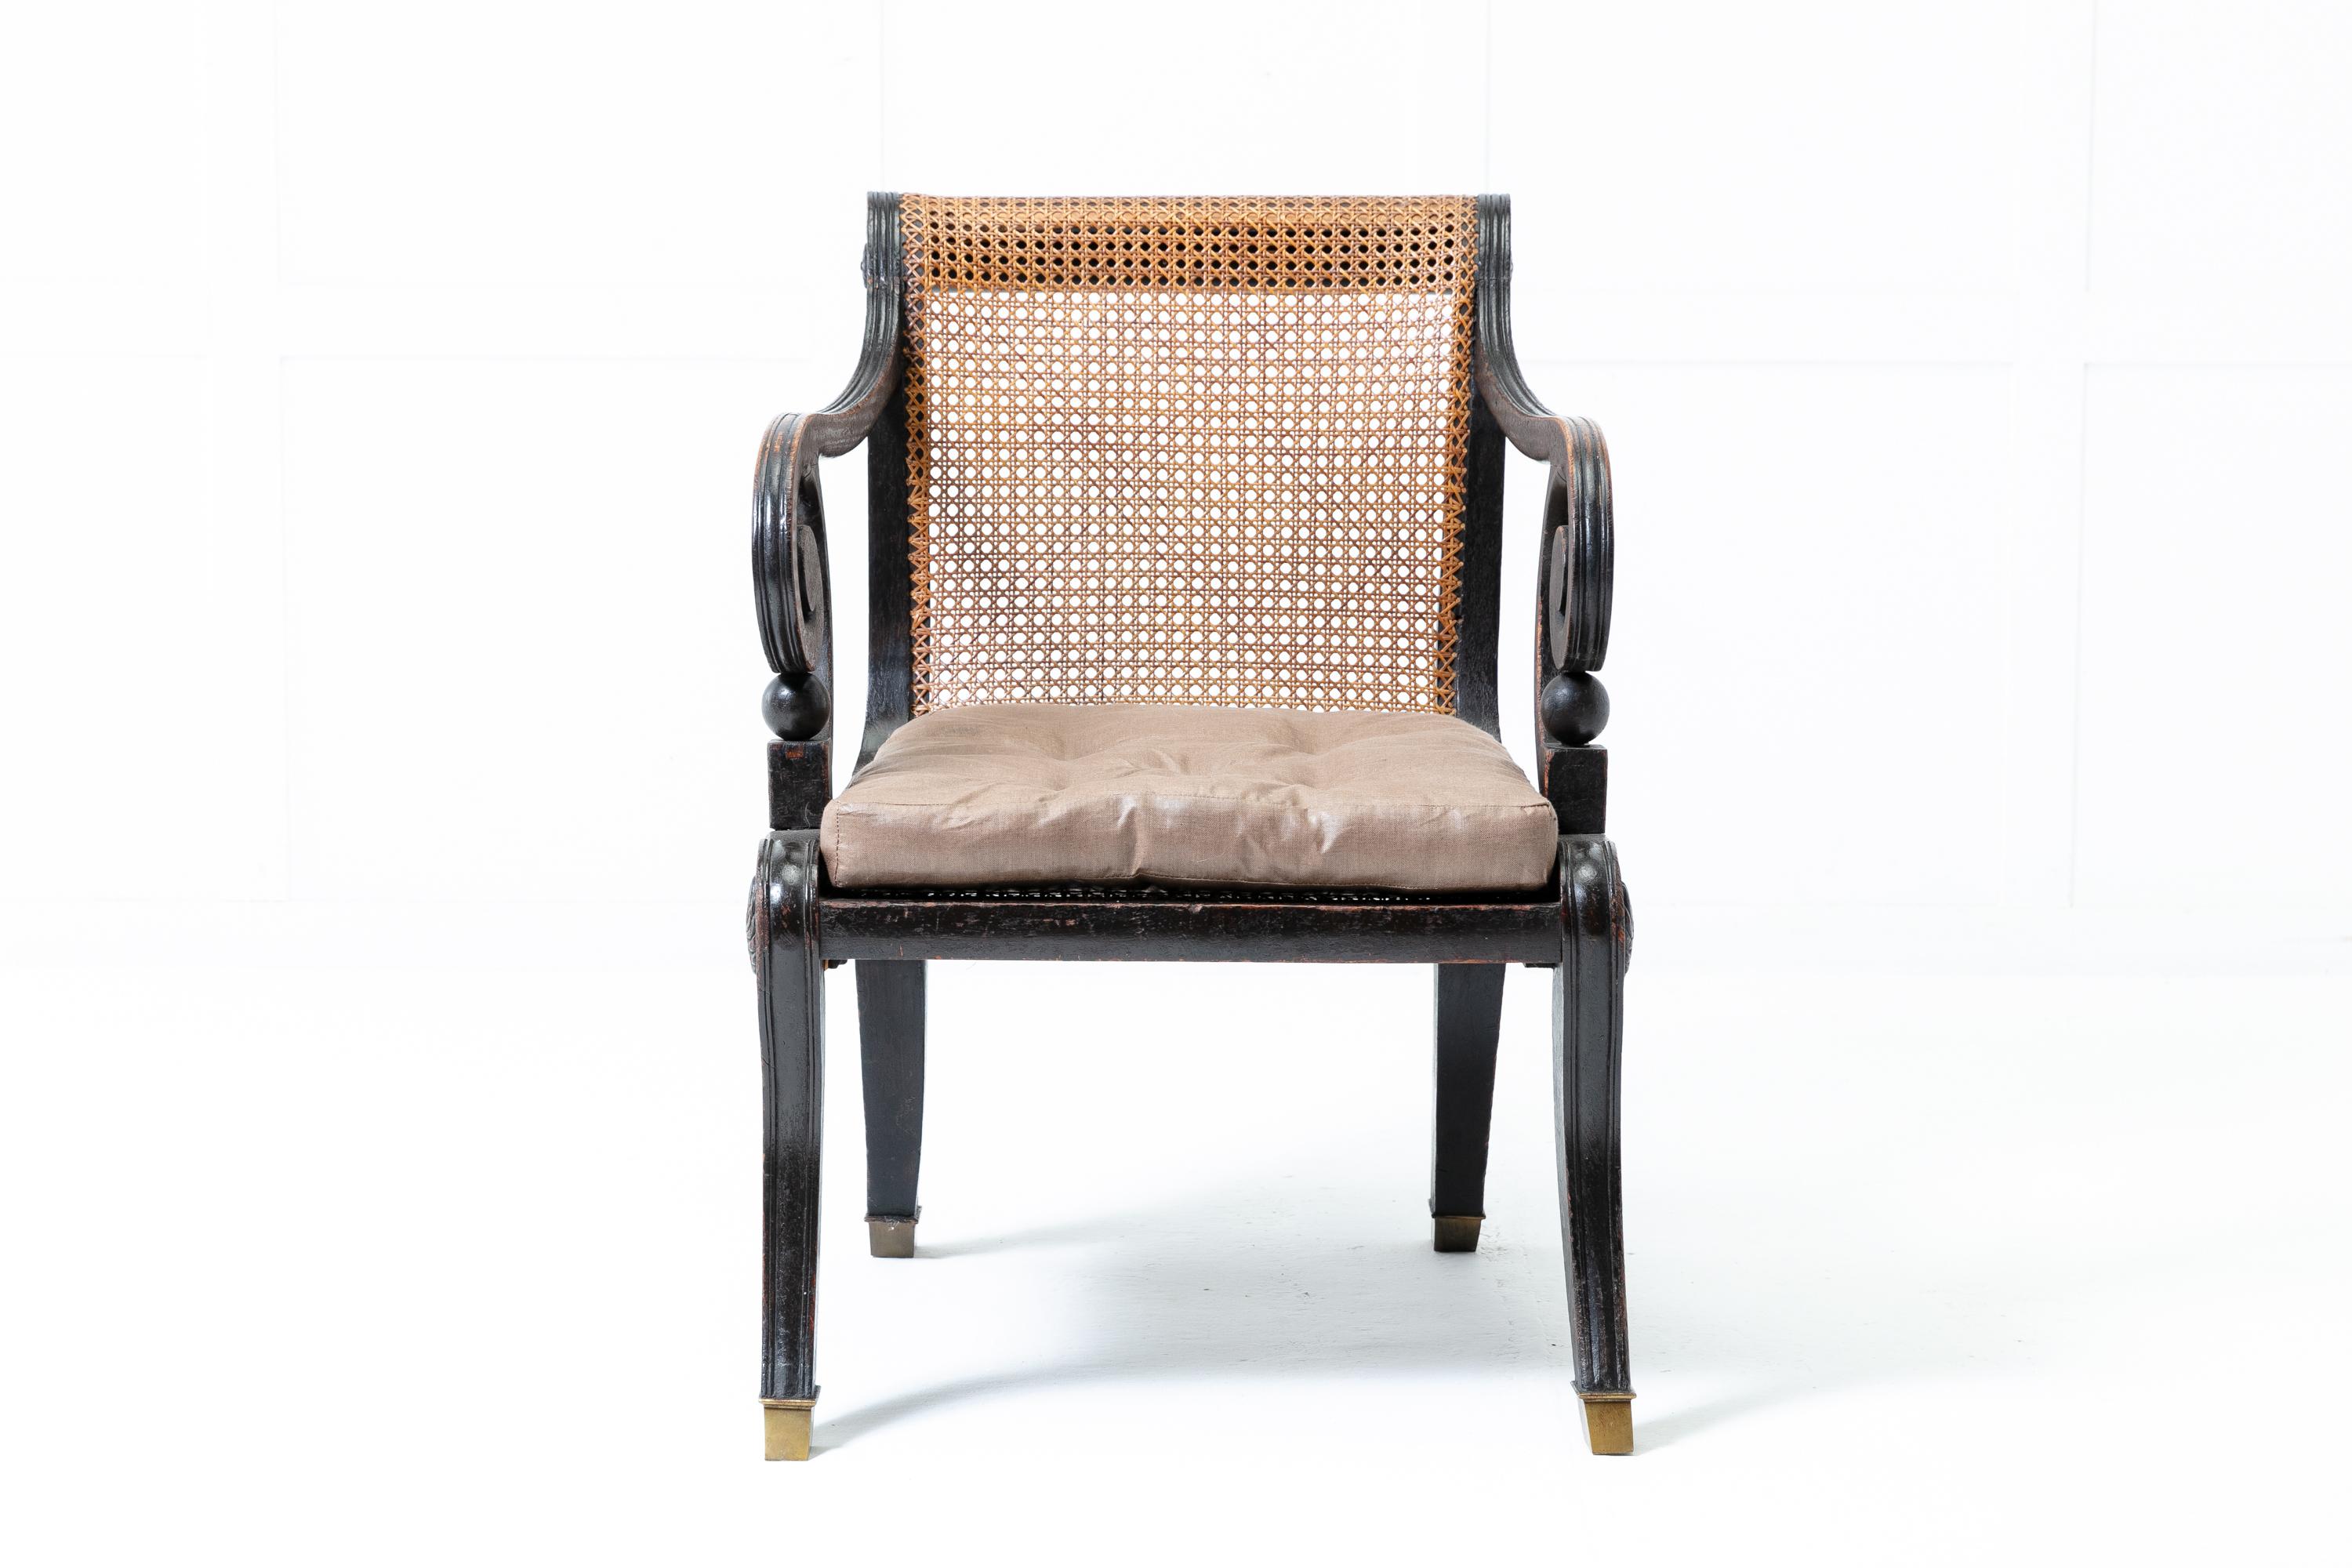 A great shaped Regency ebonised library chair, circa 1820 with its original ebonised finish. Having an exaggerated scroll back and arms. The reeded frame is caned and decorated with carved paterae to the sides. Standing on sabre legs with brass